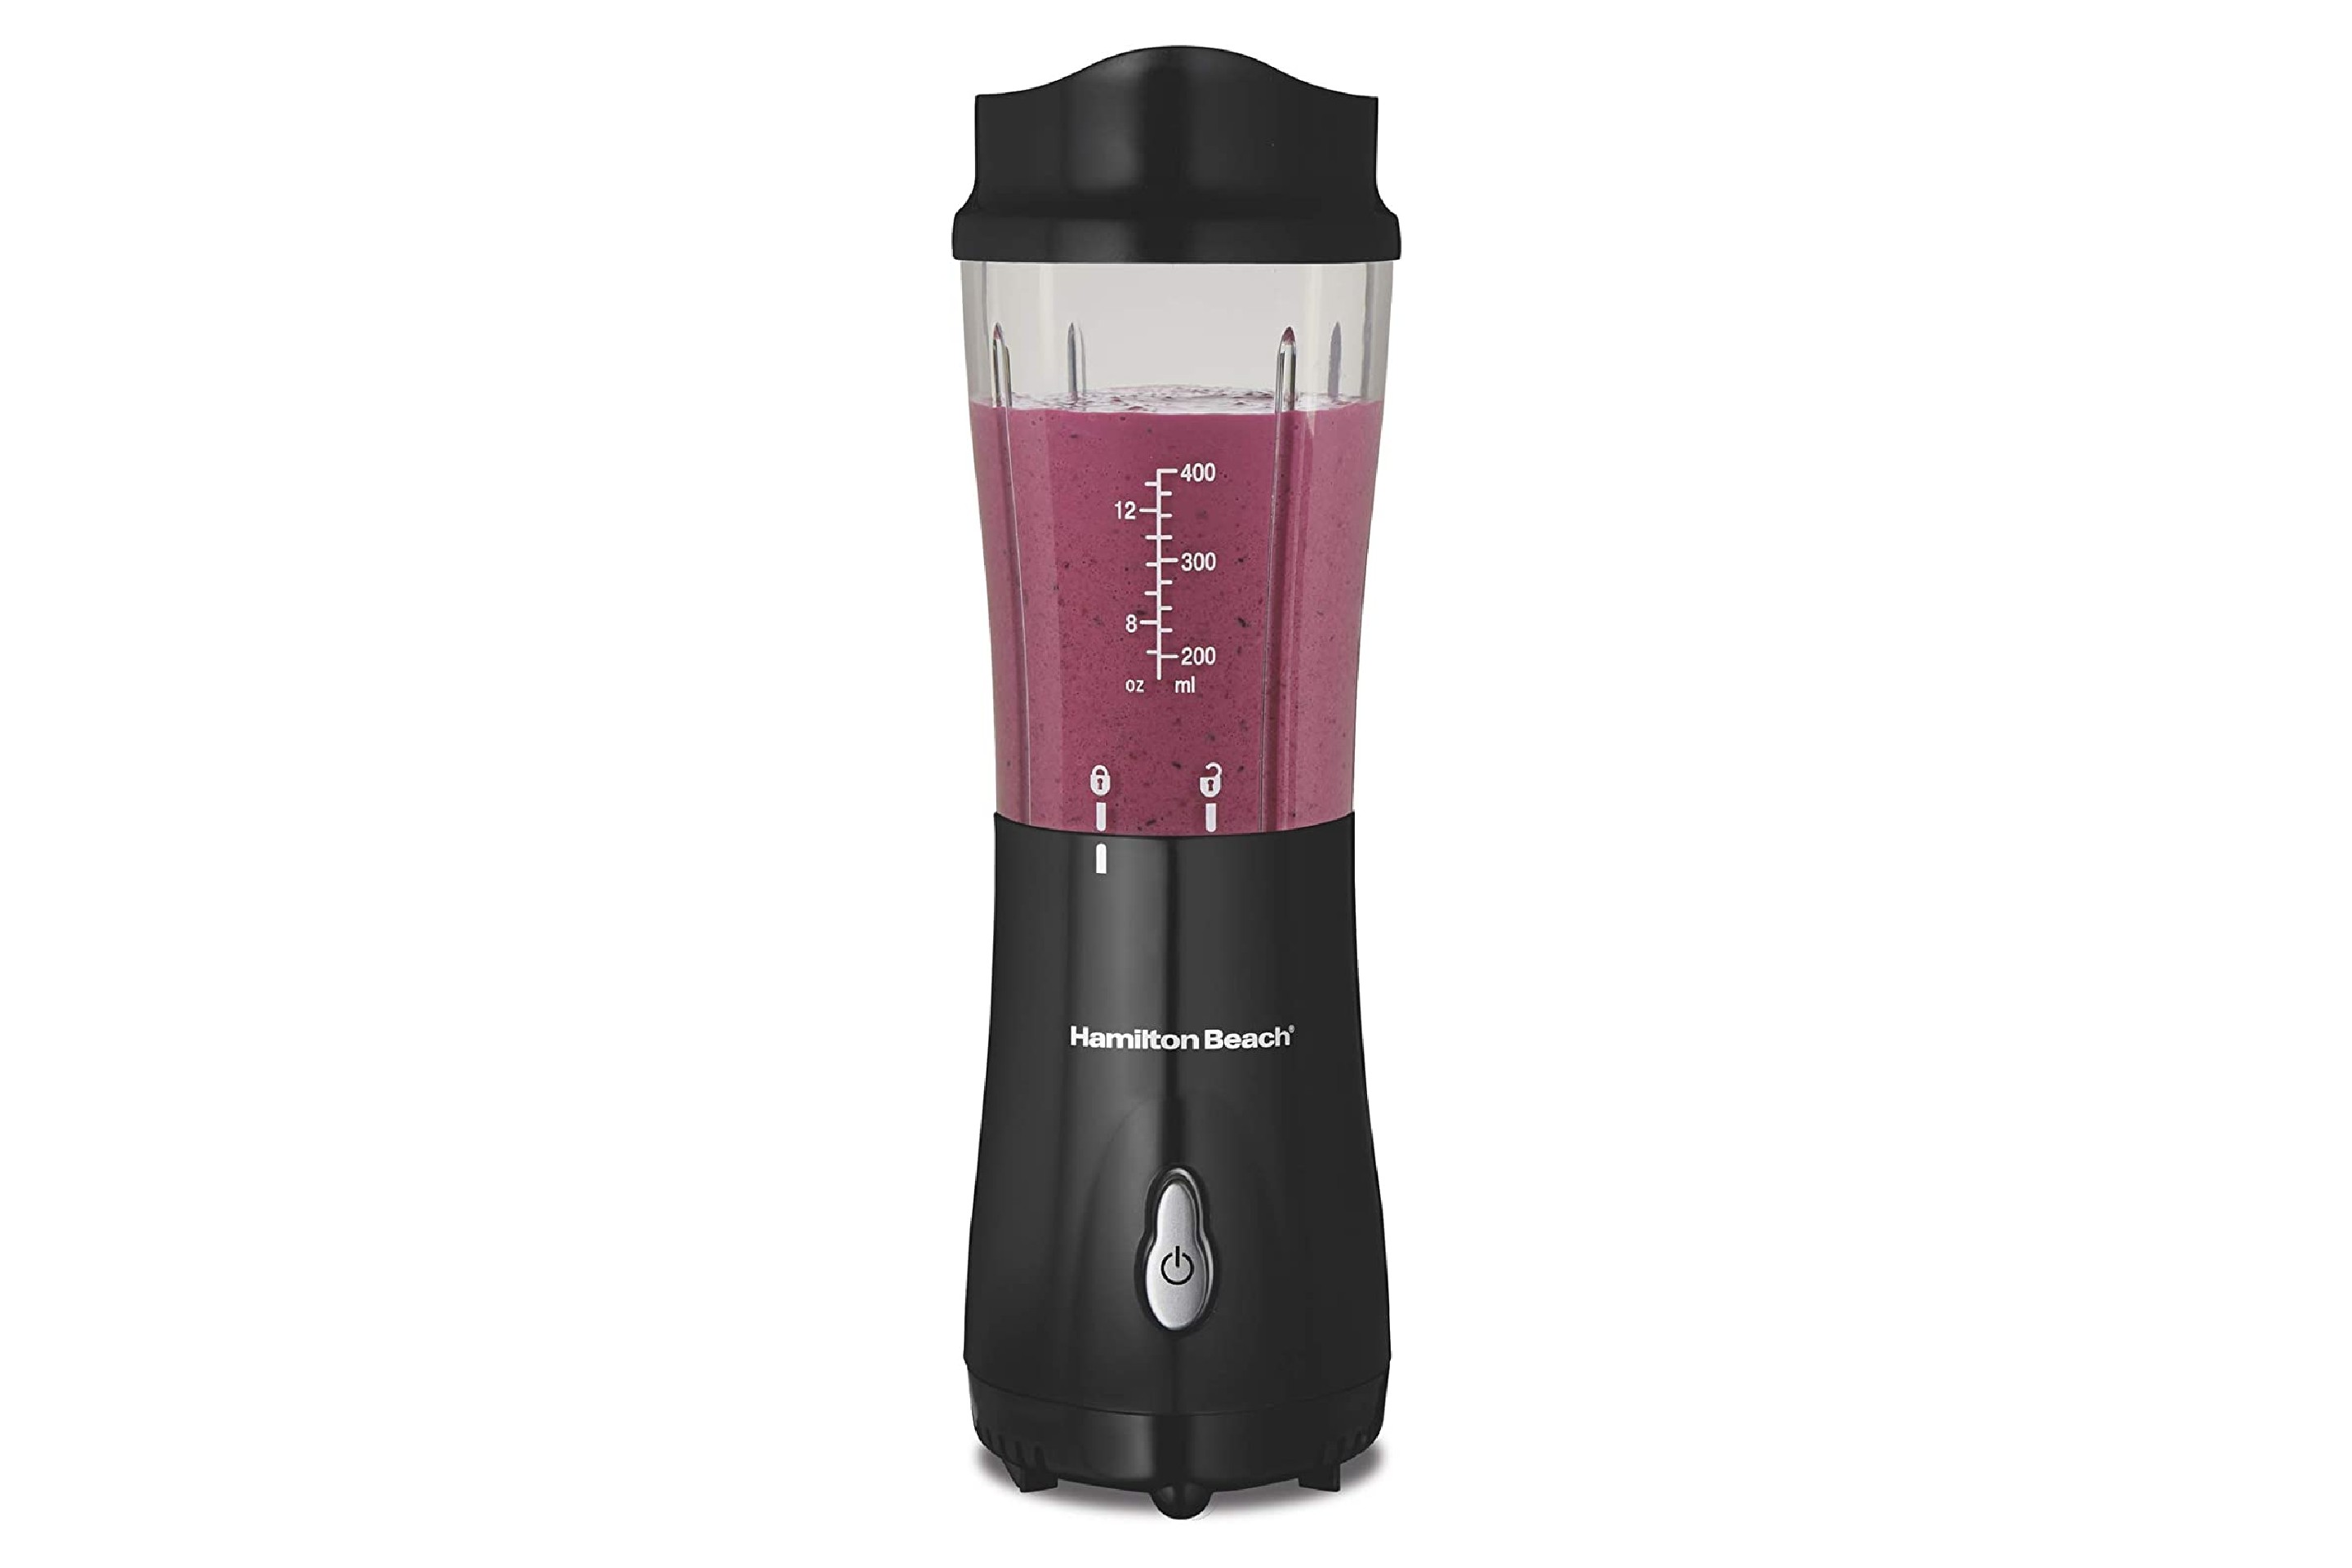 La Reveuse Personal Size Blender 250 Watts Shakes Smoothies with 1